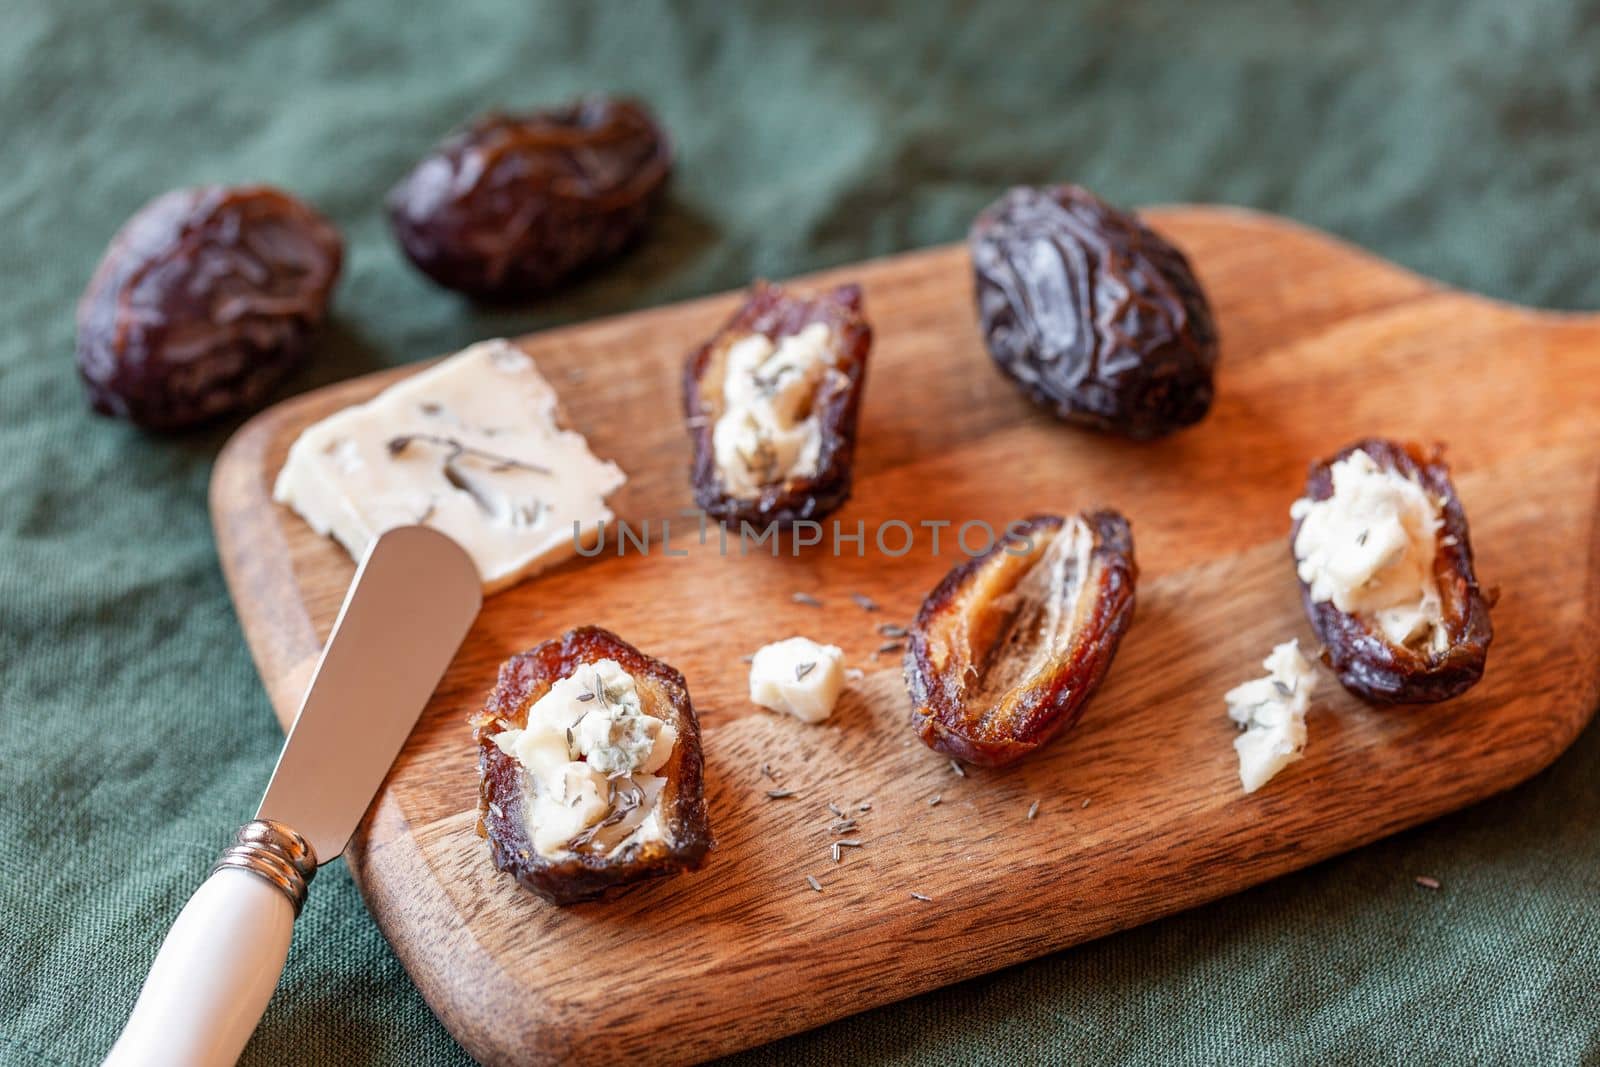 date fruits stuffed with gorgonzola cheese, side view